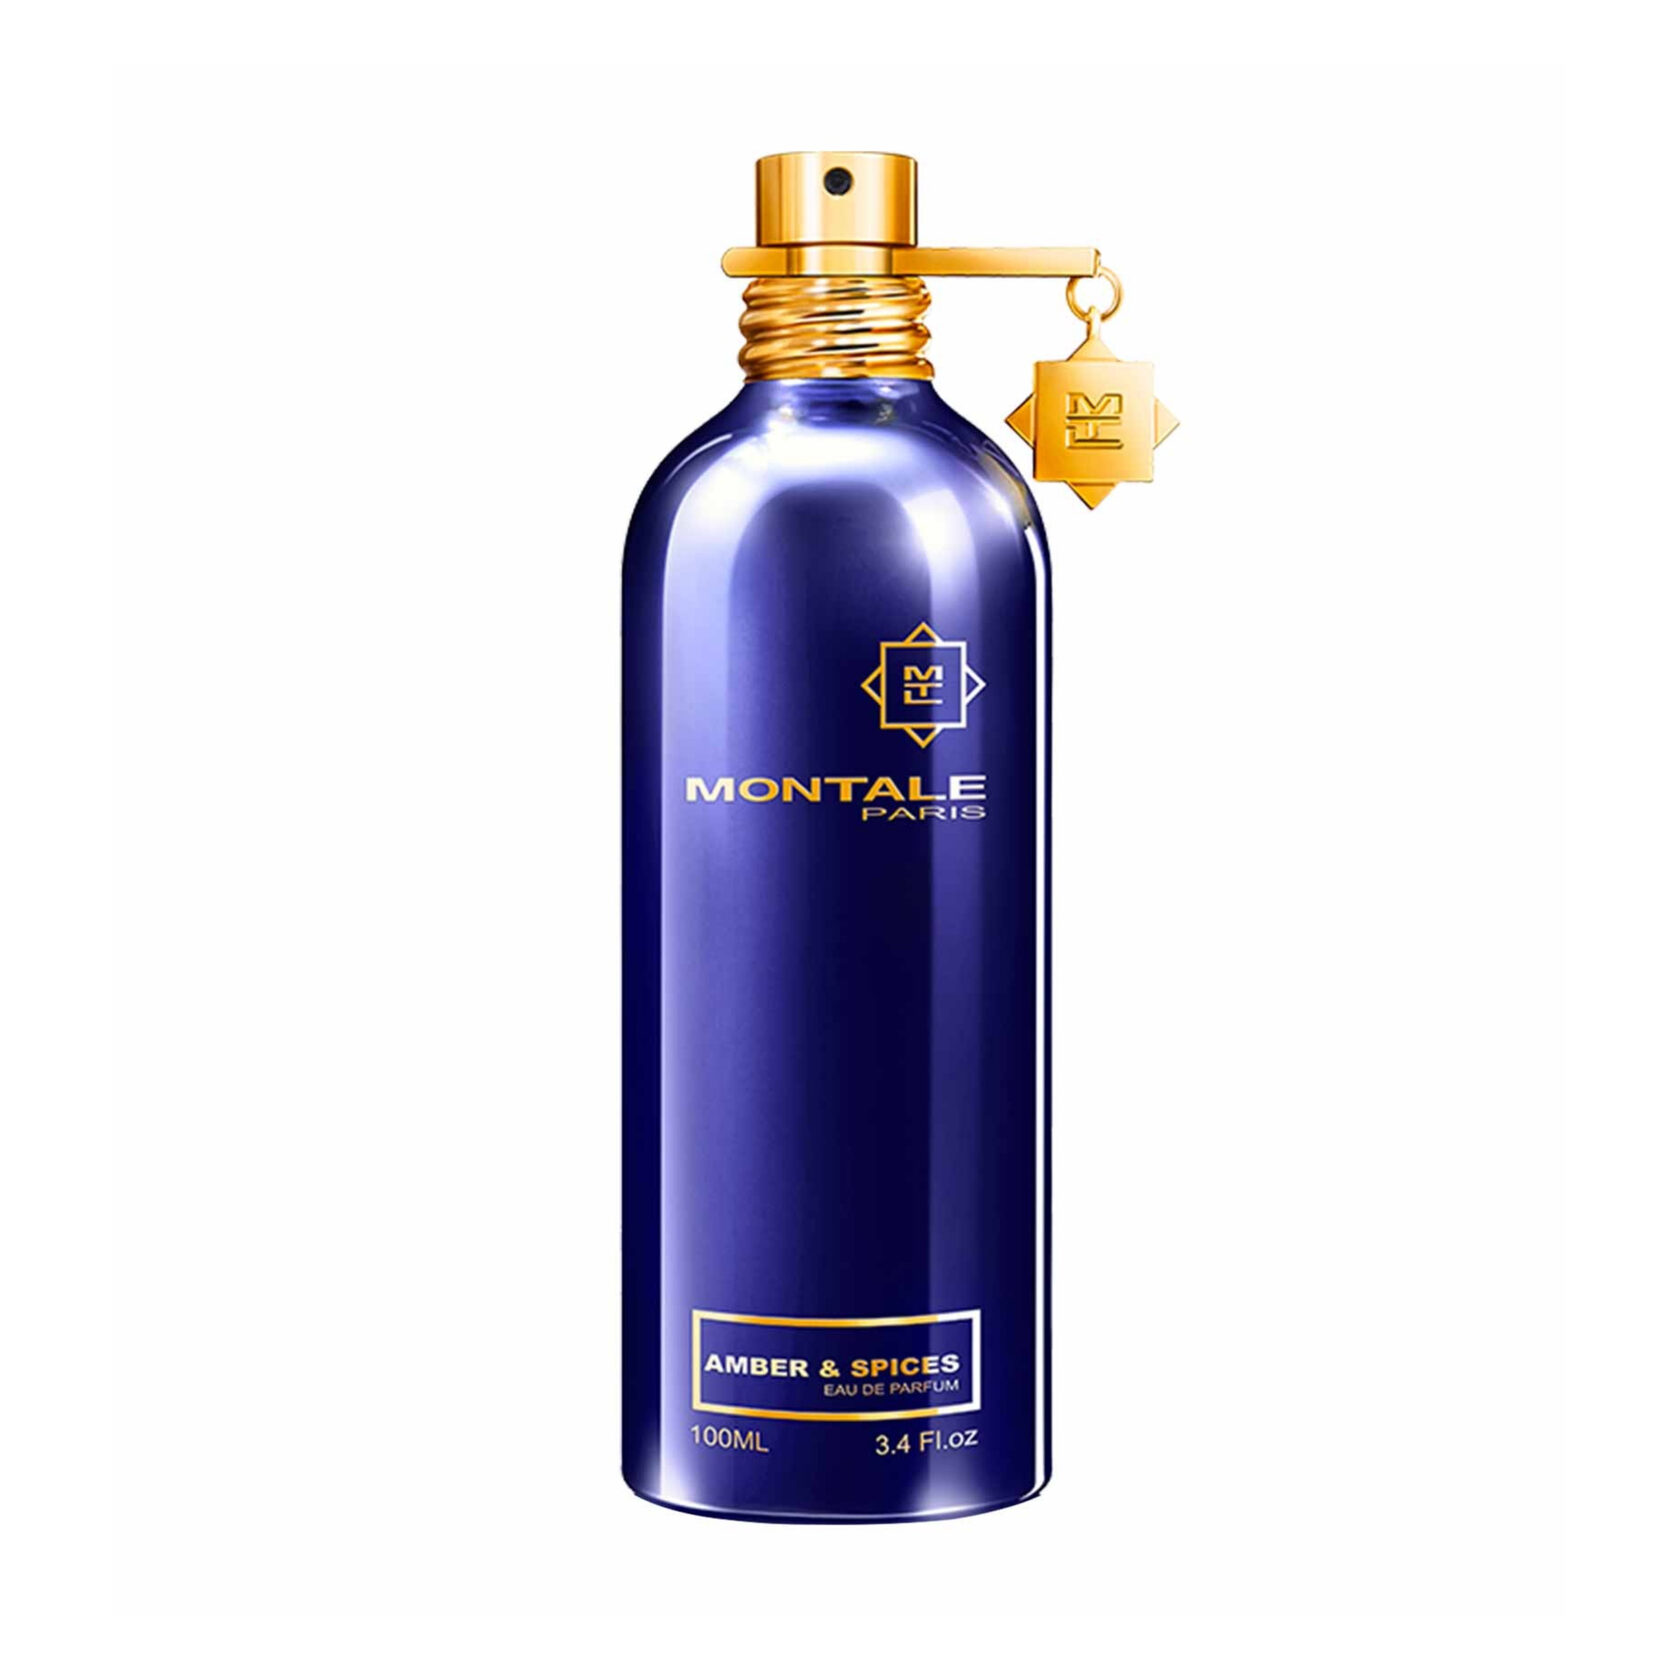 Montale blue. Montale Amber & Spices EDP 50 ml. Montale Amber & Spices 100ml. Montale Aoud Amber EDP, 100ml. Montale Blue Amber EDP.